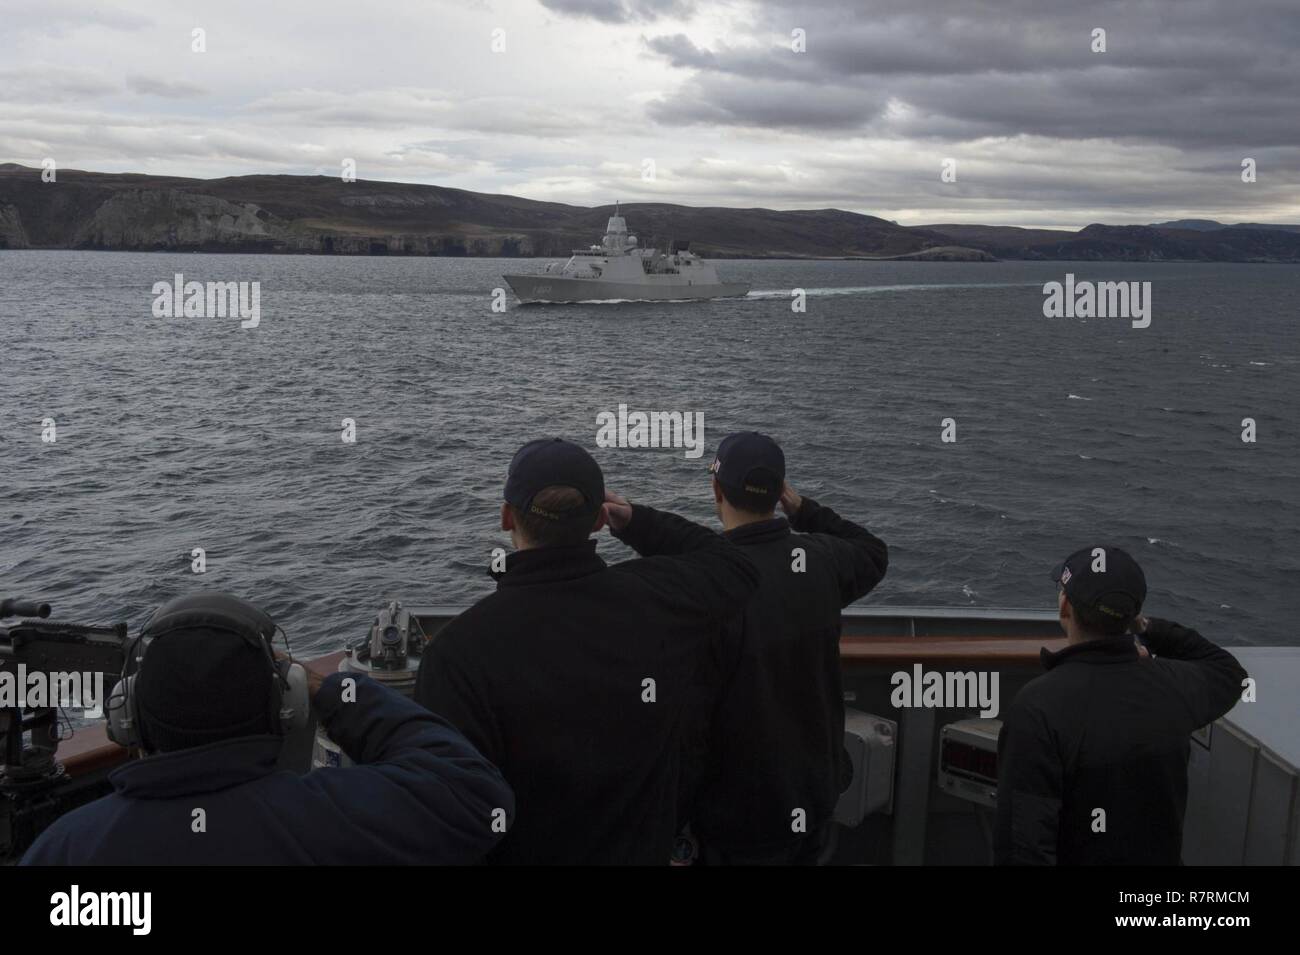 CAPE WRATH, Scotland (April 3, 2017) Sailors assigned to the Arleigh Burke-class guided-missile destroyer USS Carney (DDG 64) render honors to Royal Netherlands Navy frigate HNLMS Tromp (F803) during exercise Joint Warrior 17-1. Carney is forward-deployed to Rota, Spain, conducting its third patrol in the U.S. 6th Fleet area of operations in support of U.S. national security interests in Europe. Stock Photo